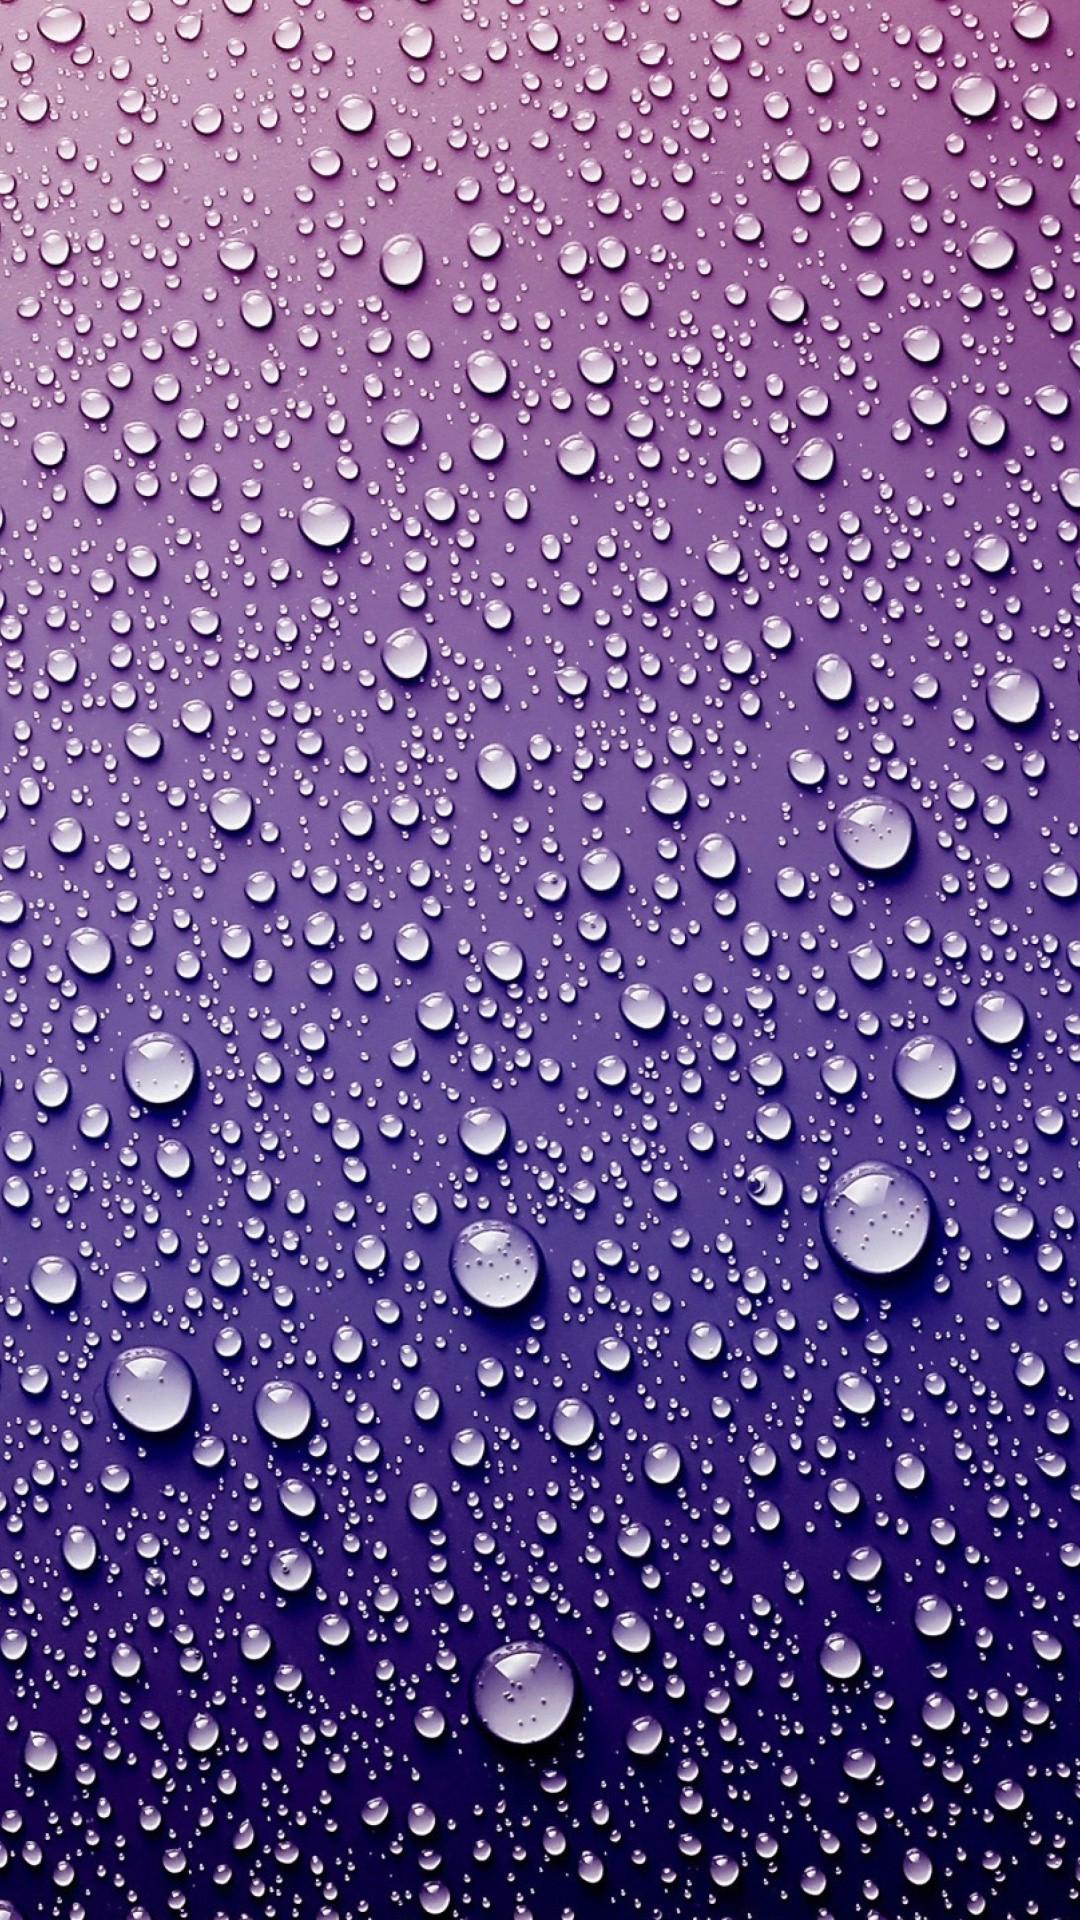 Water wallpaper for android